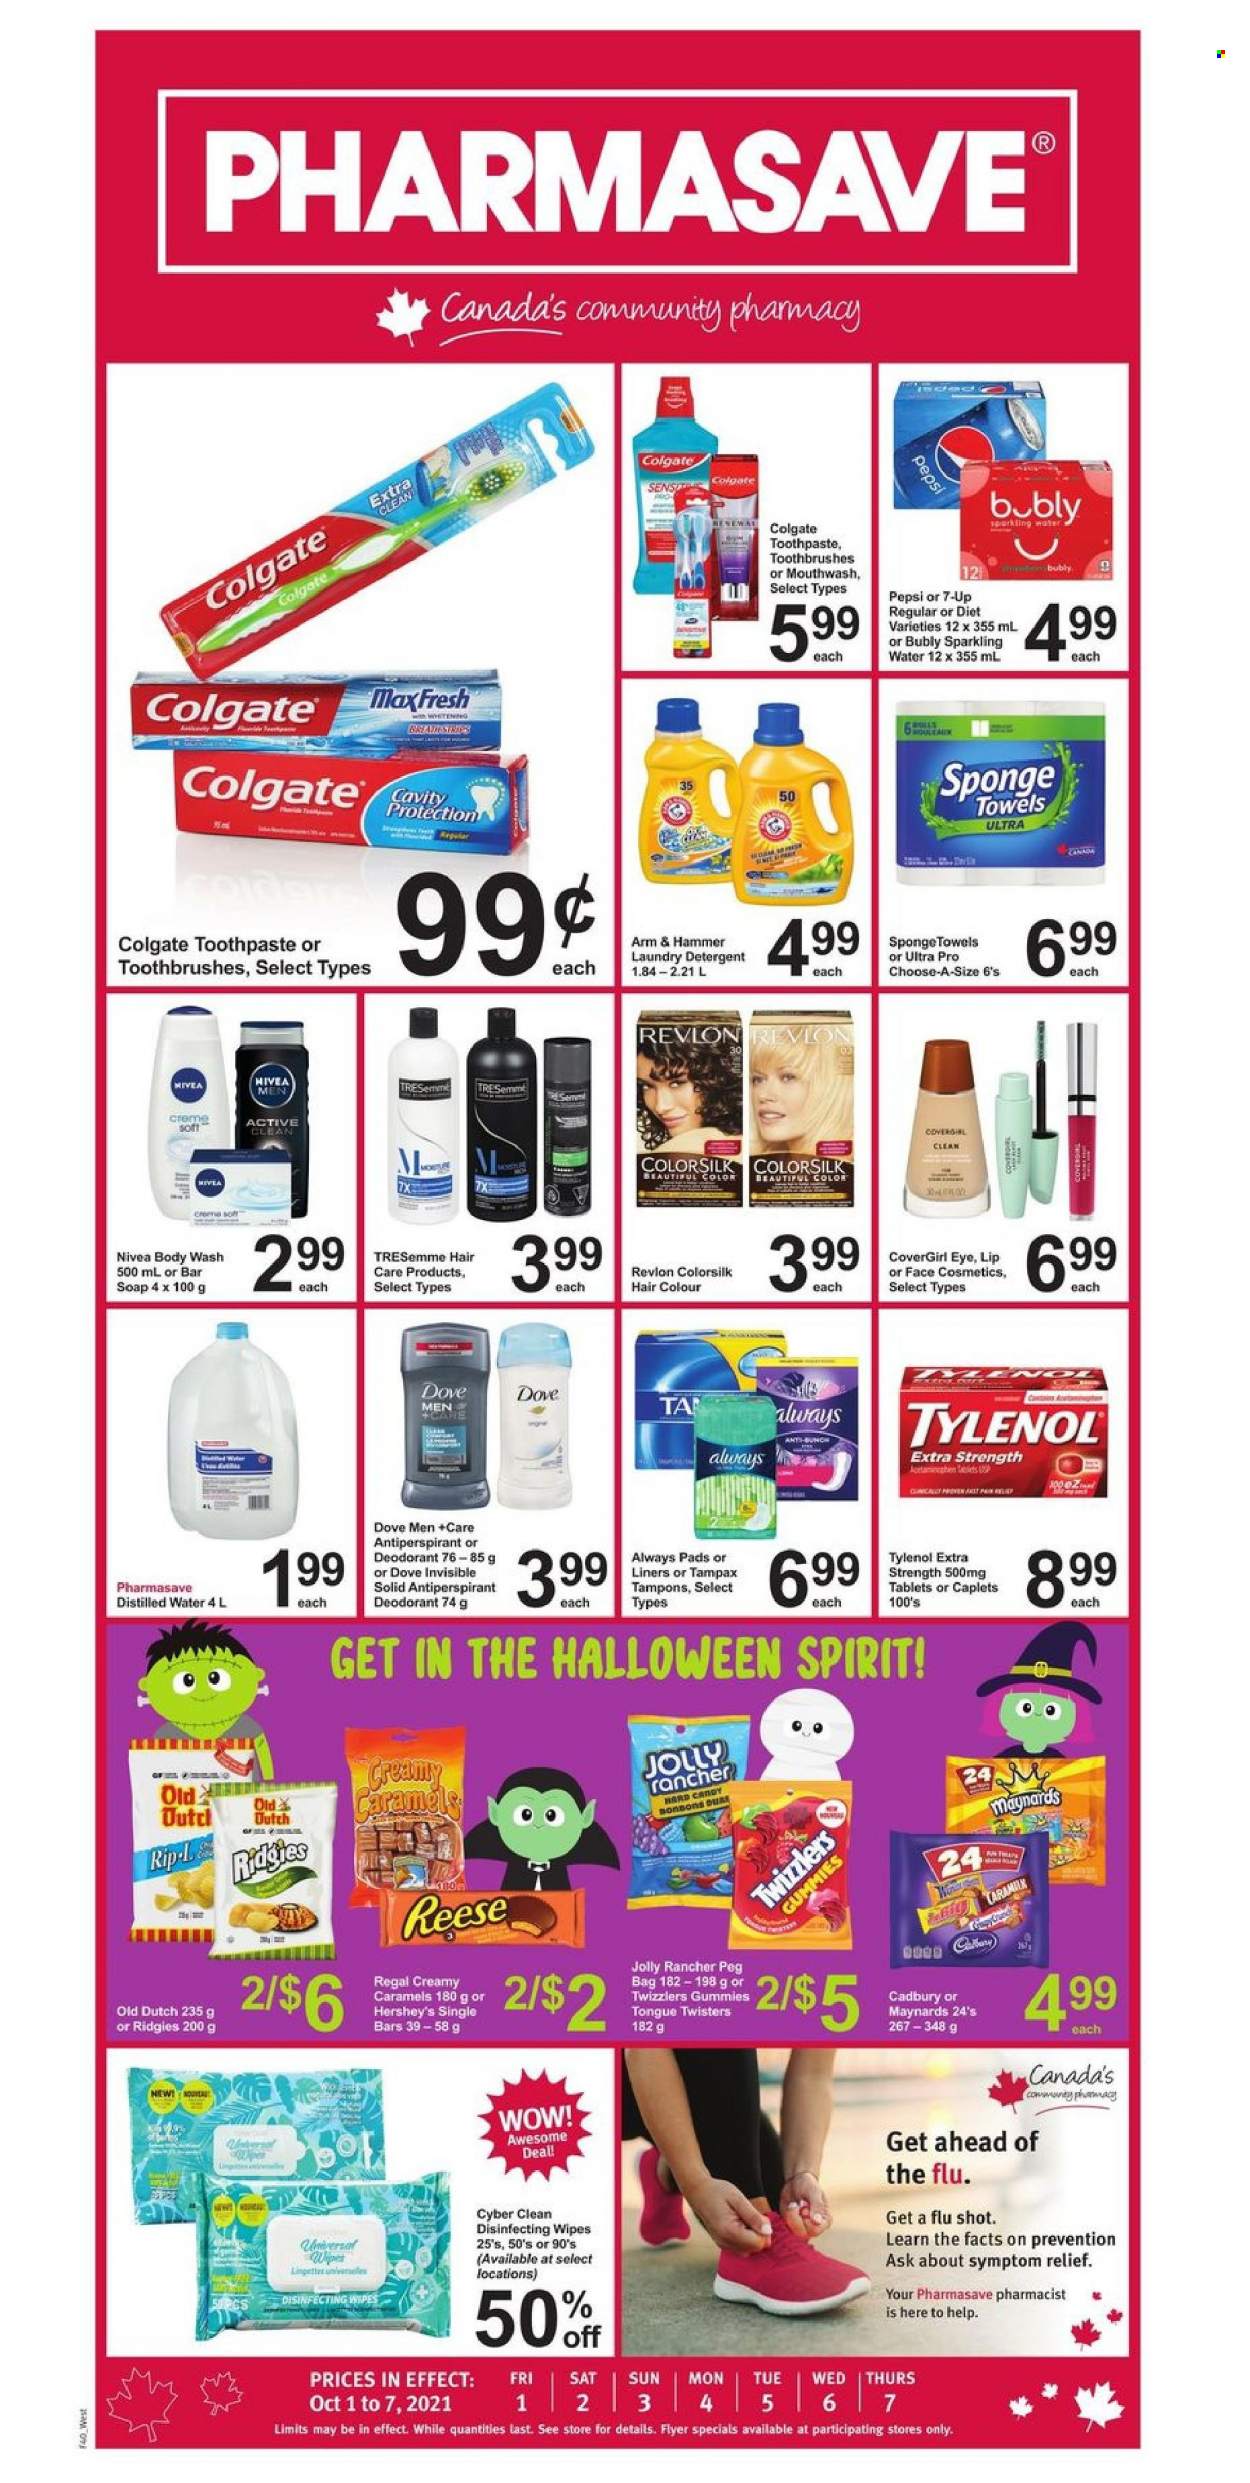 thumbnail - Pharmasave Flyer - October 01, 2021 - October 07, 2021 - Sales products - Hershey's, Cadbury, ARM & HAMMER, Pepsi, 7UP, sparkling water, wipes, laundry detergent, body wash, soap bar, soap, toothpaste, mouthwash, Always pads, sanitary pads, tampons, Revlon, TRESemmé, hair color, anti-perspirant, sponge, towel, Tylenol, detergent, Dove, Colgate, Tampax, Nivea, deodorant. Page 1.